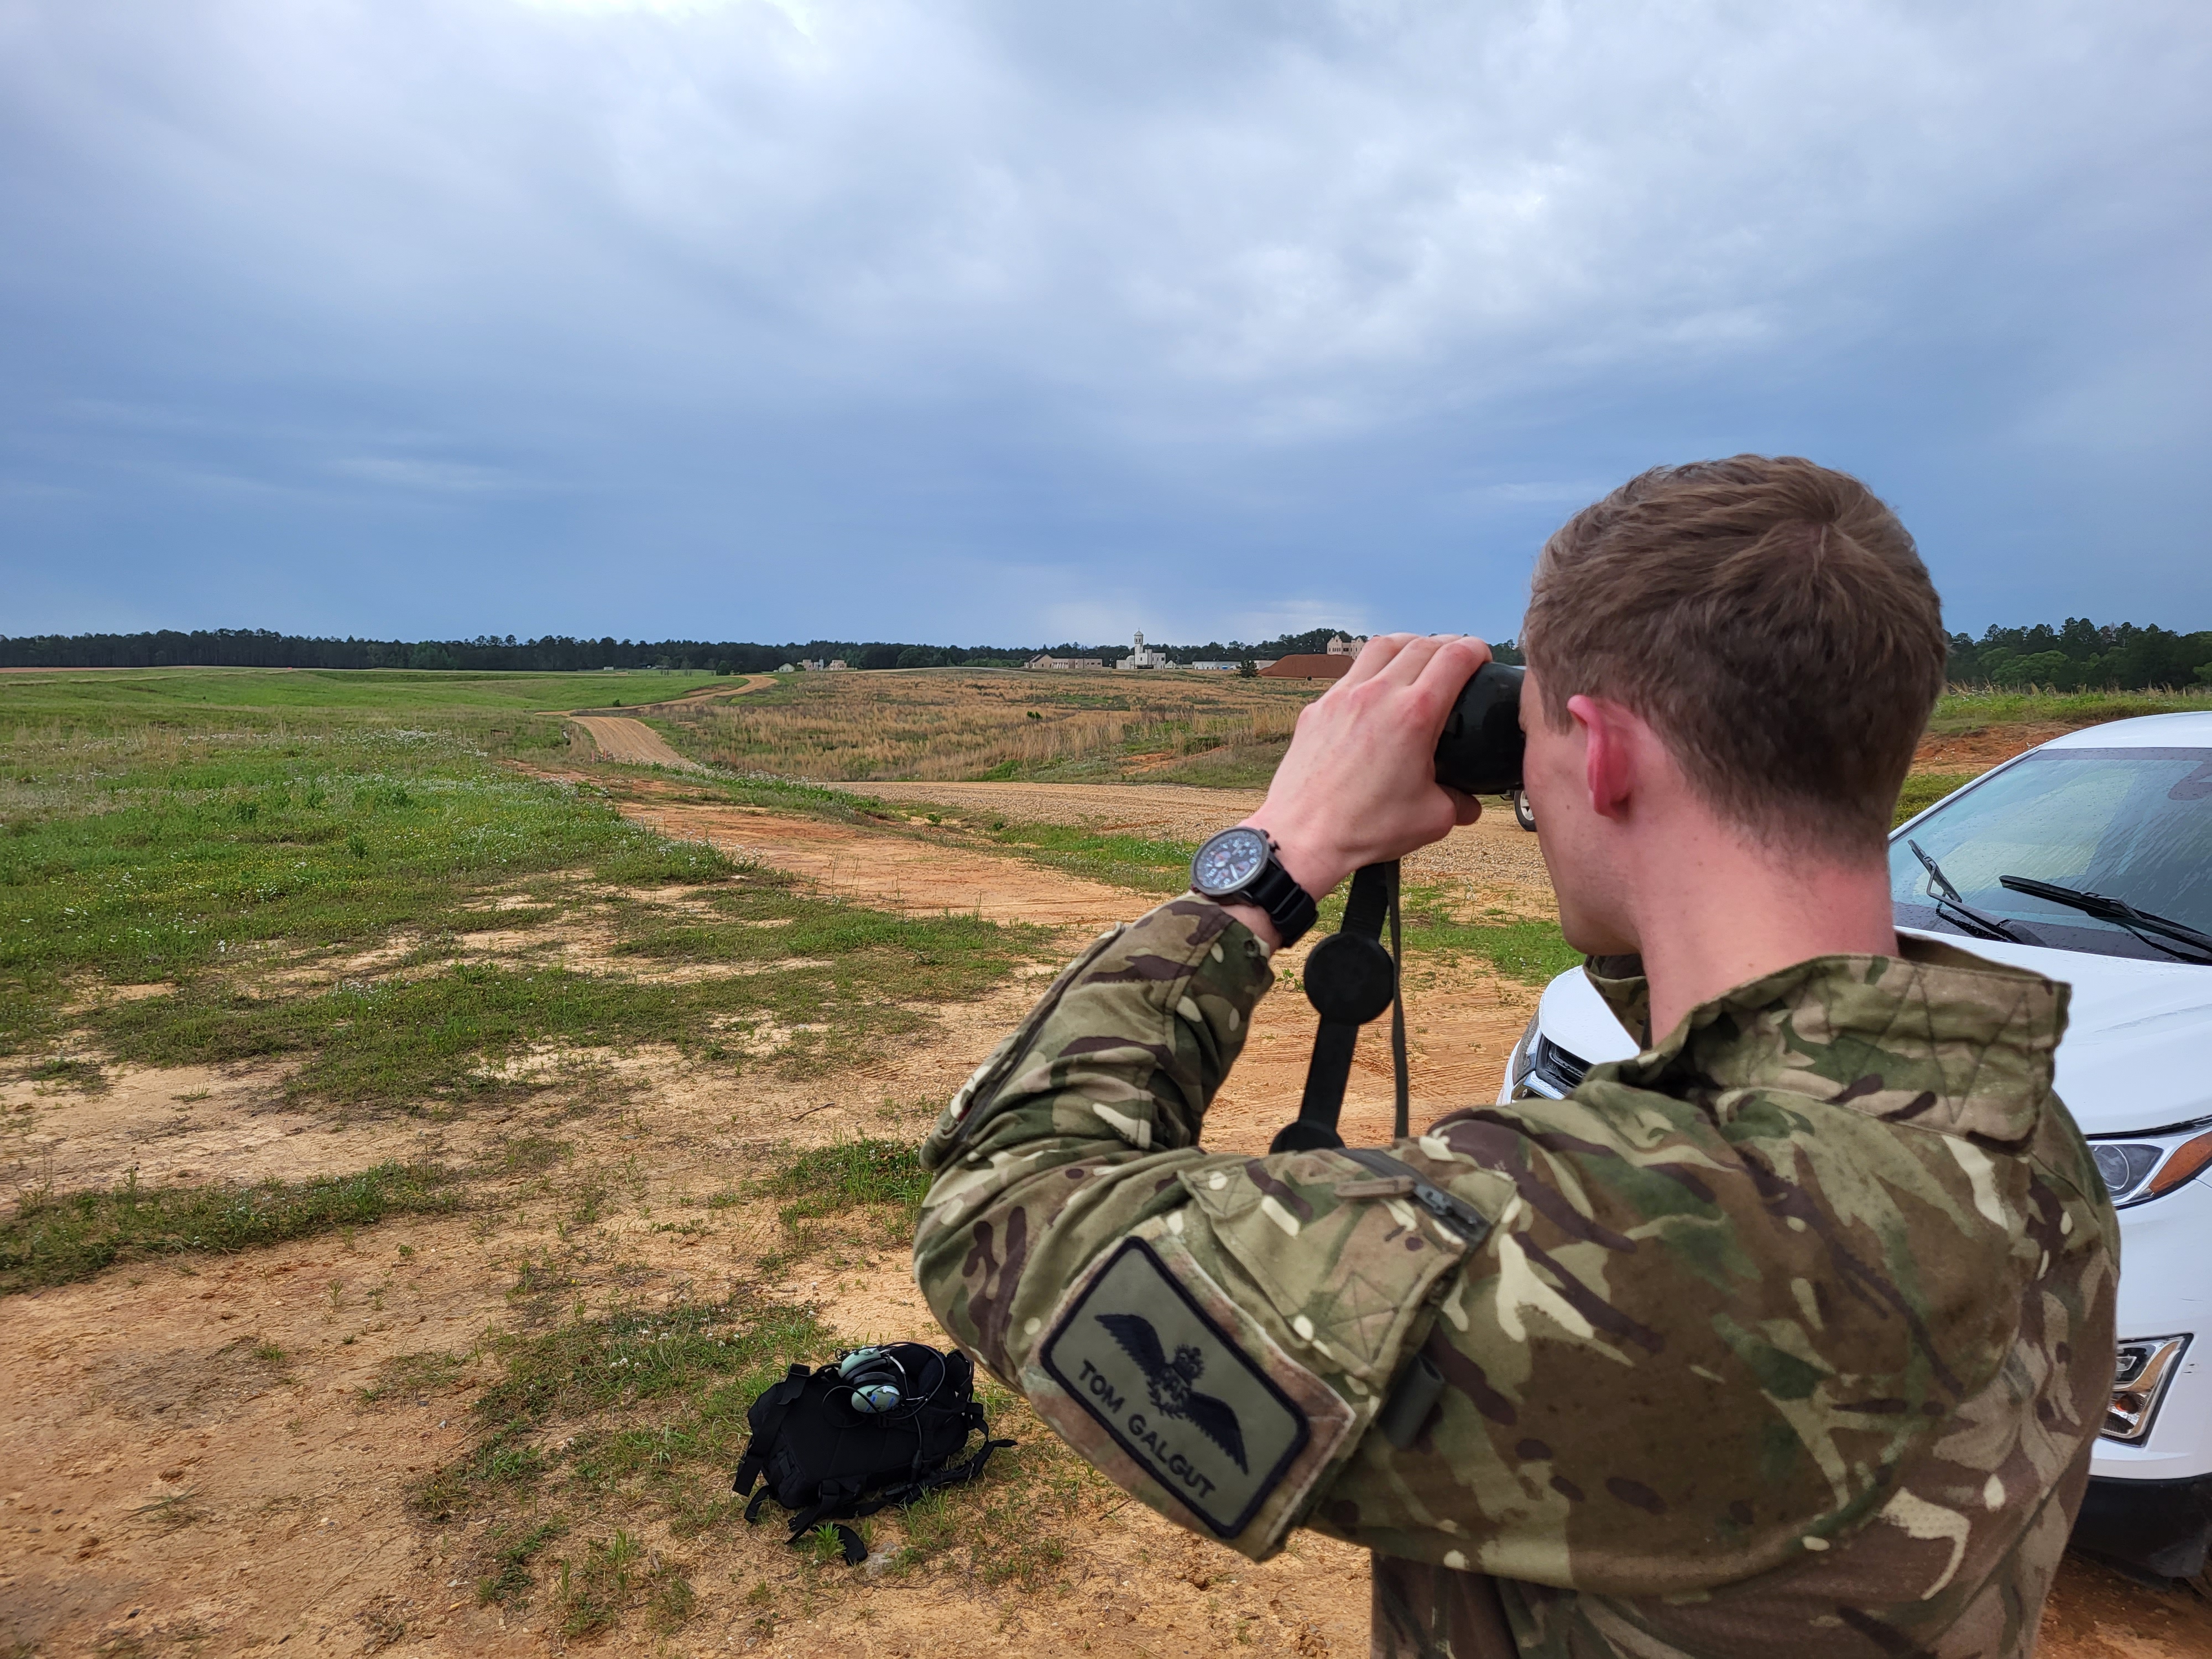 On 25 April 22, XXIV Squadron successfully trained the first frontline Atlas crews in unpaved runway operations, operating from Geronimo Temporary Landing Zone in Louisiana, USA.